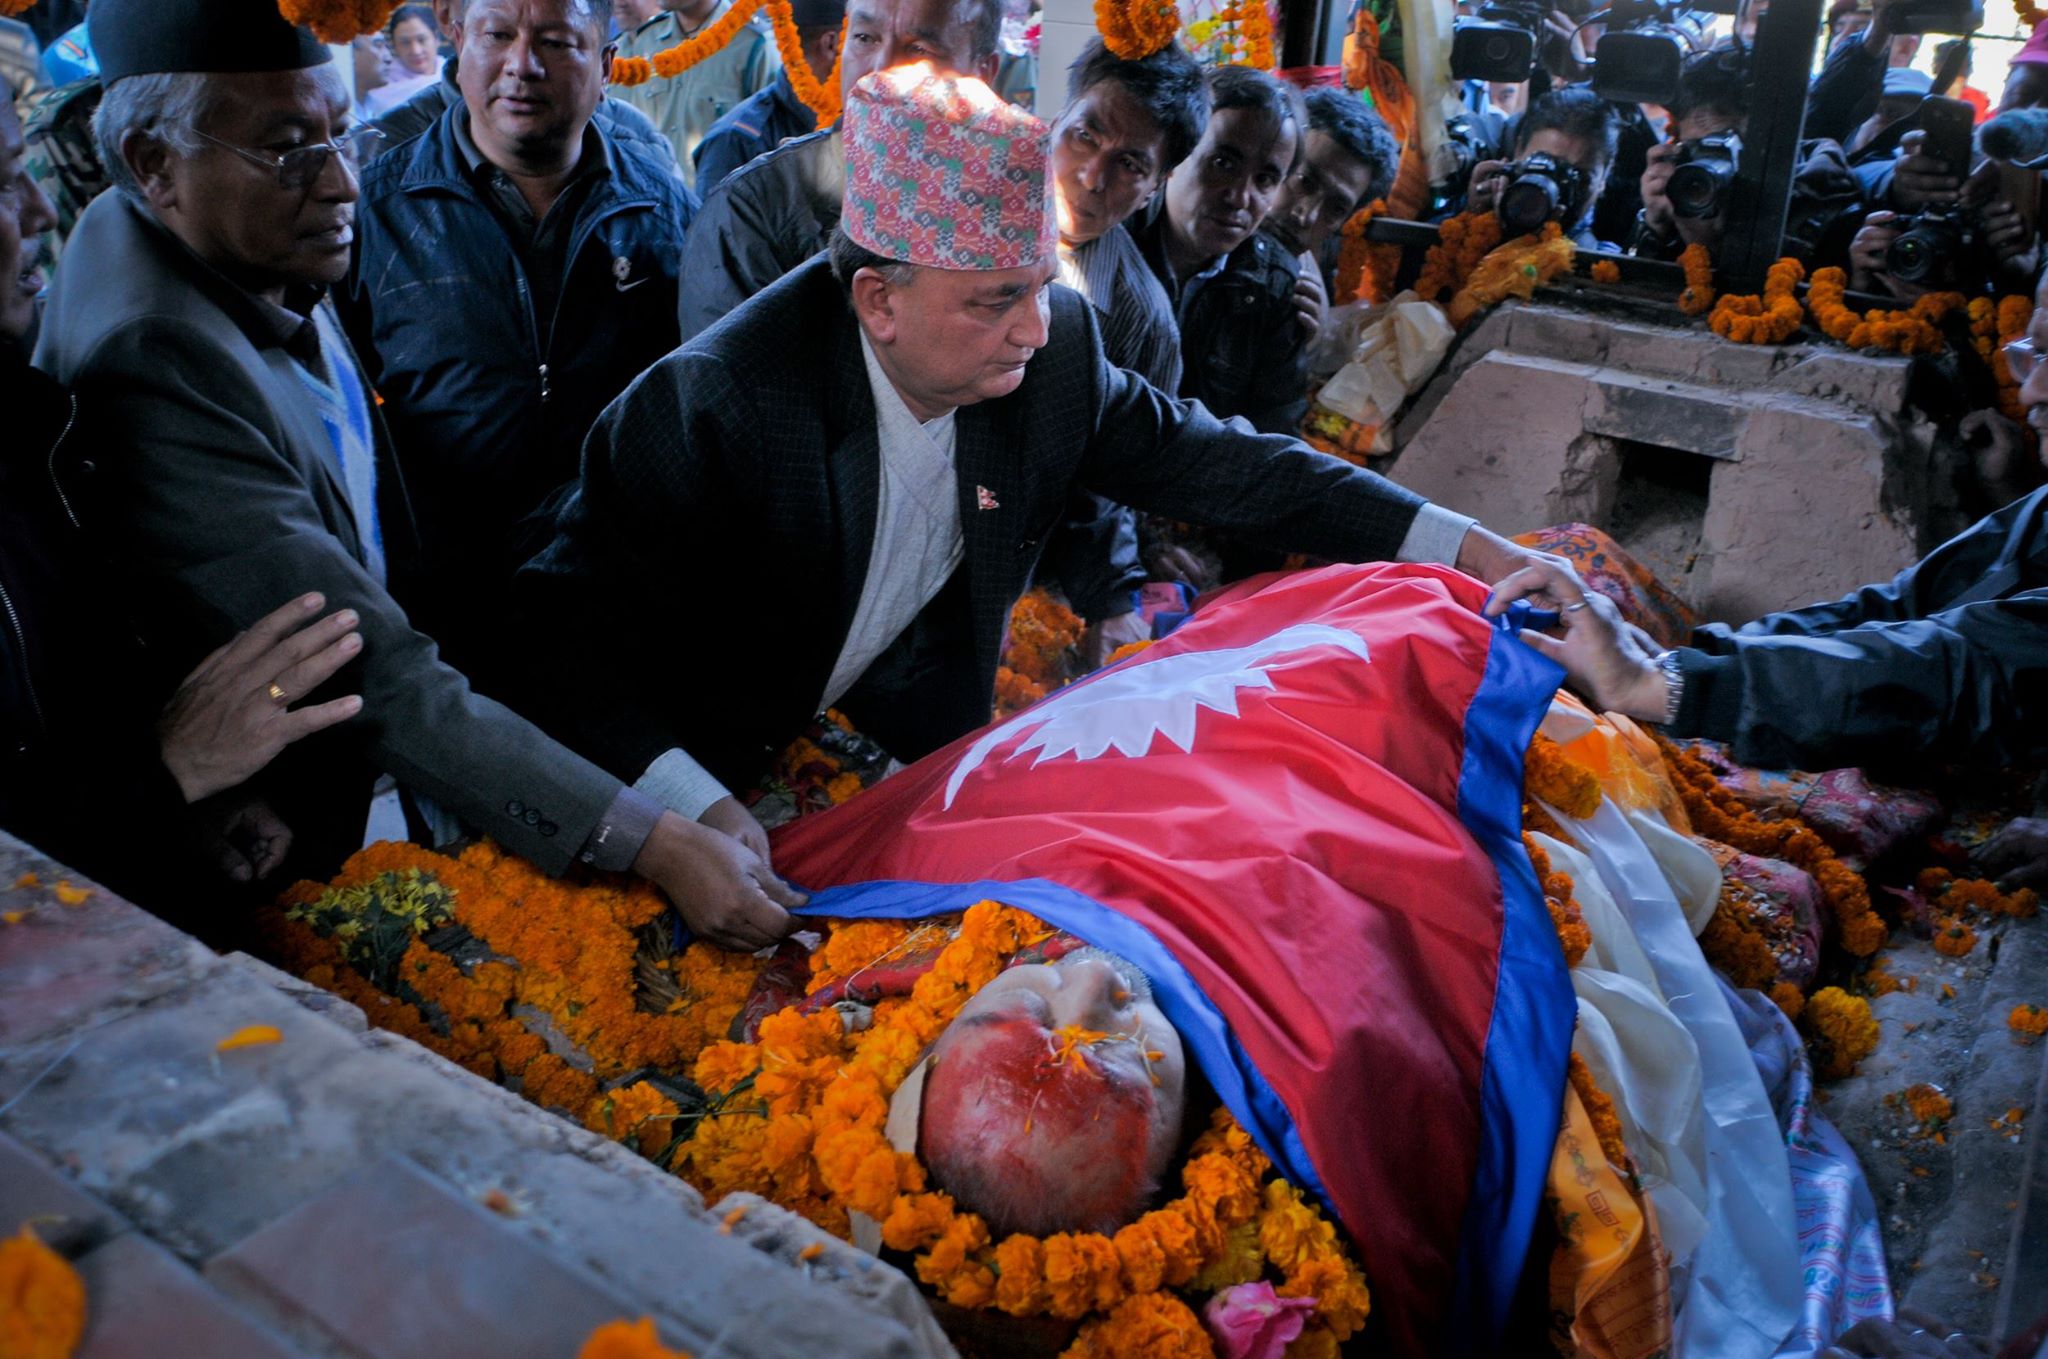 The Final Tribute: Padma Ratna Tuladhar laid to rest with nat'l honor